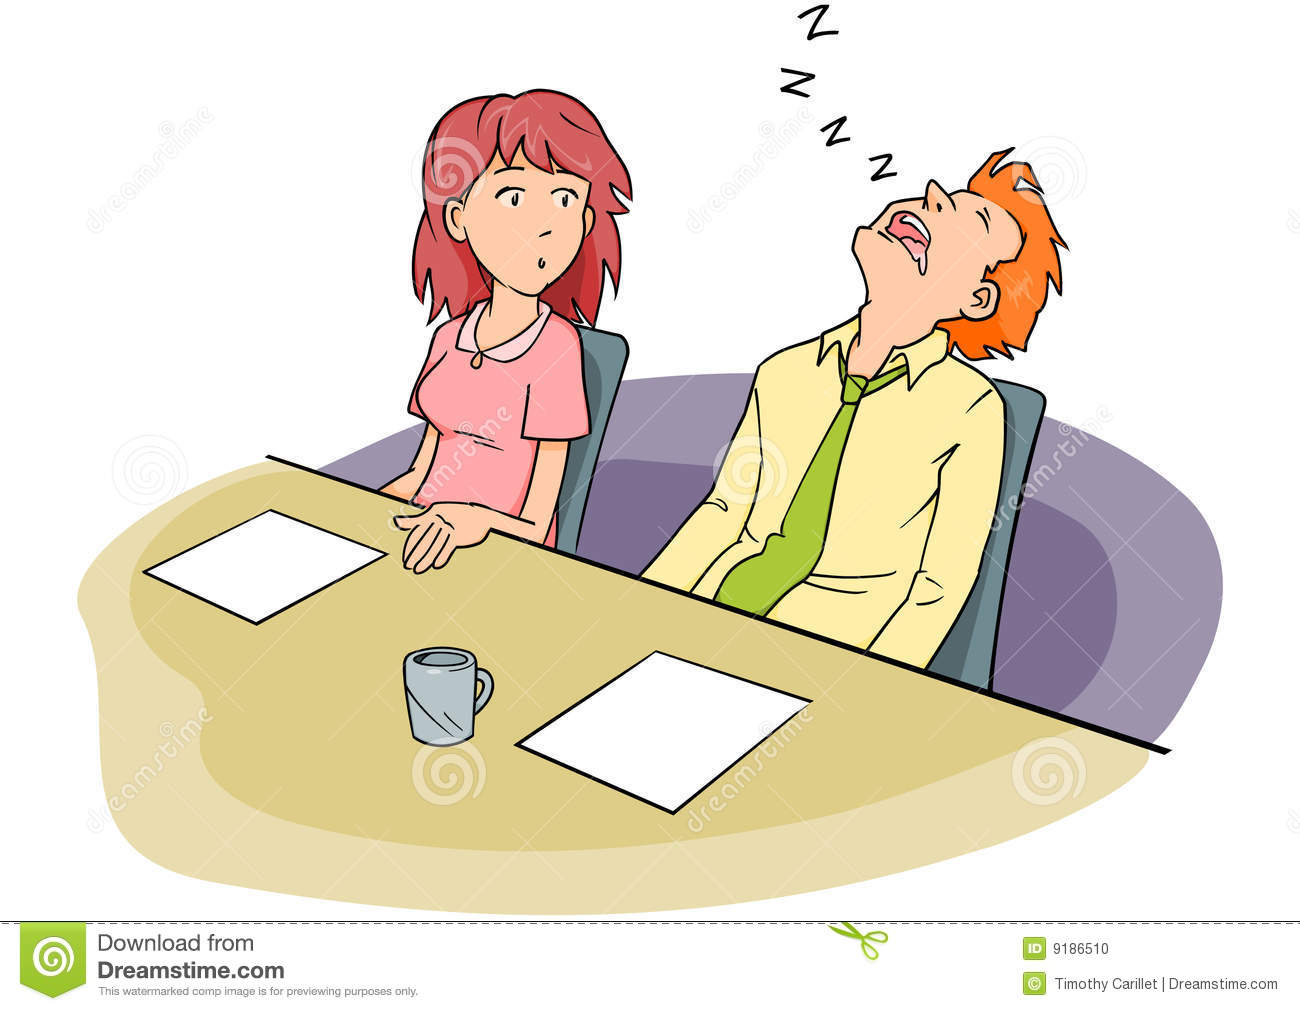 Man Snoozing At A Conference Table While A Woman Coworker Stares